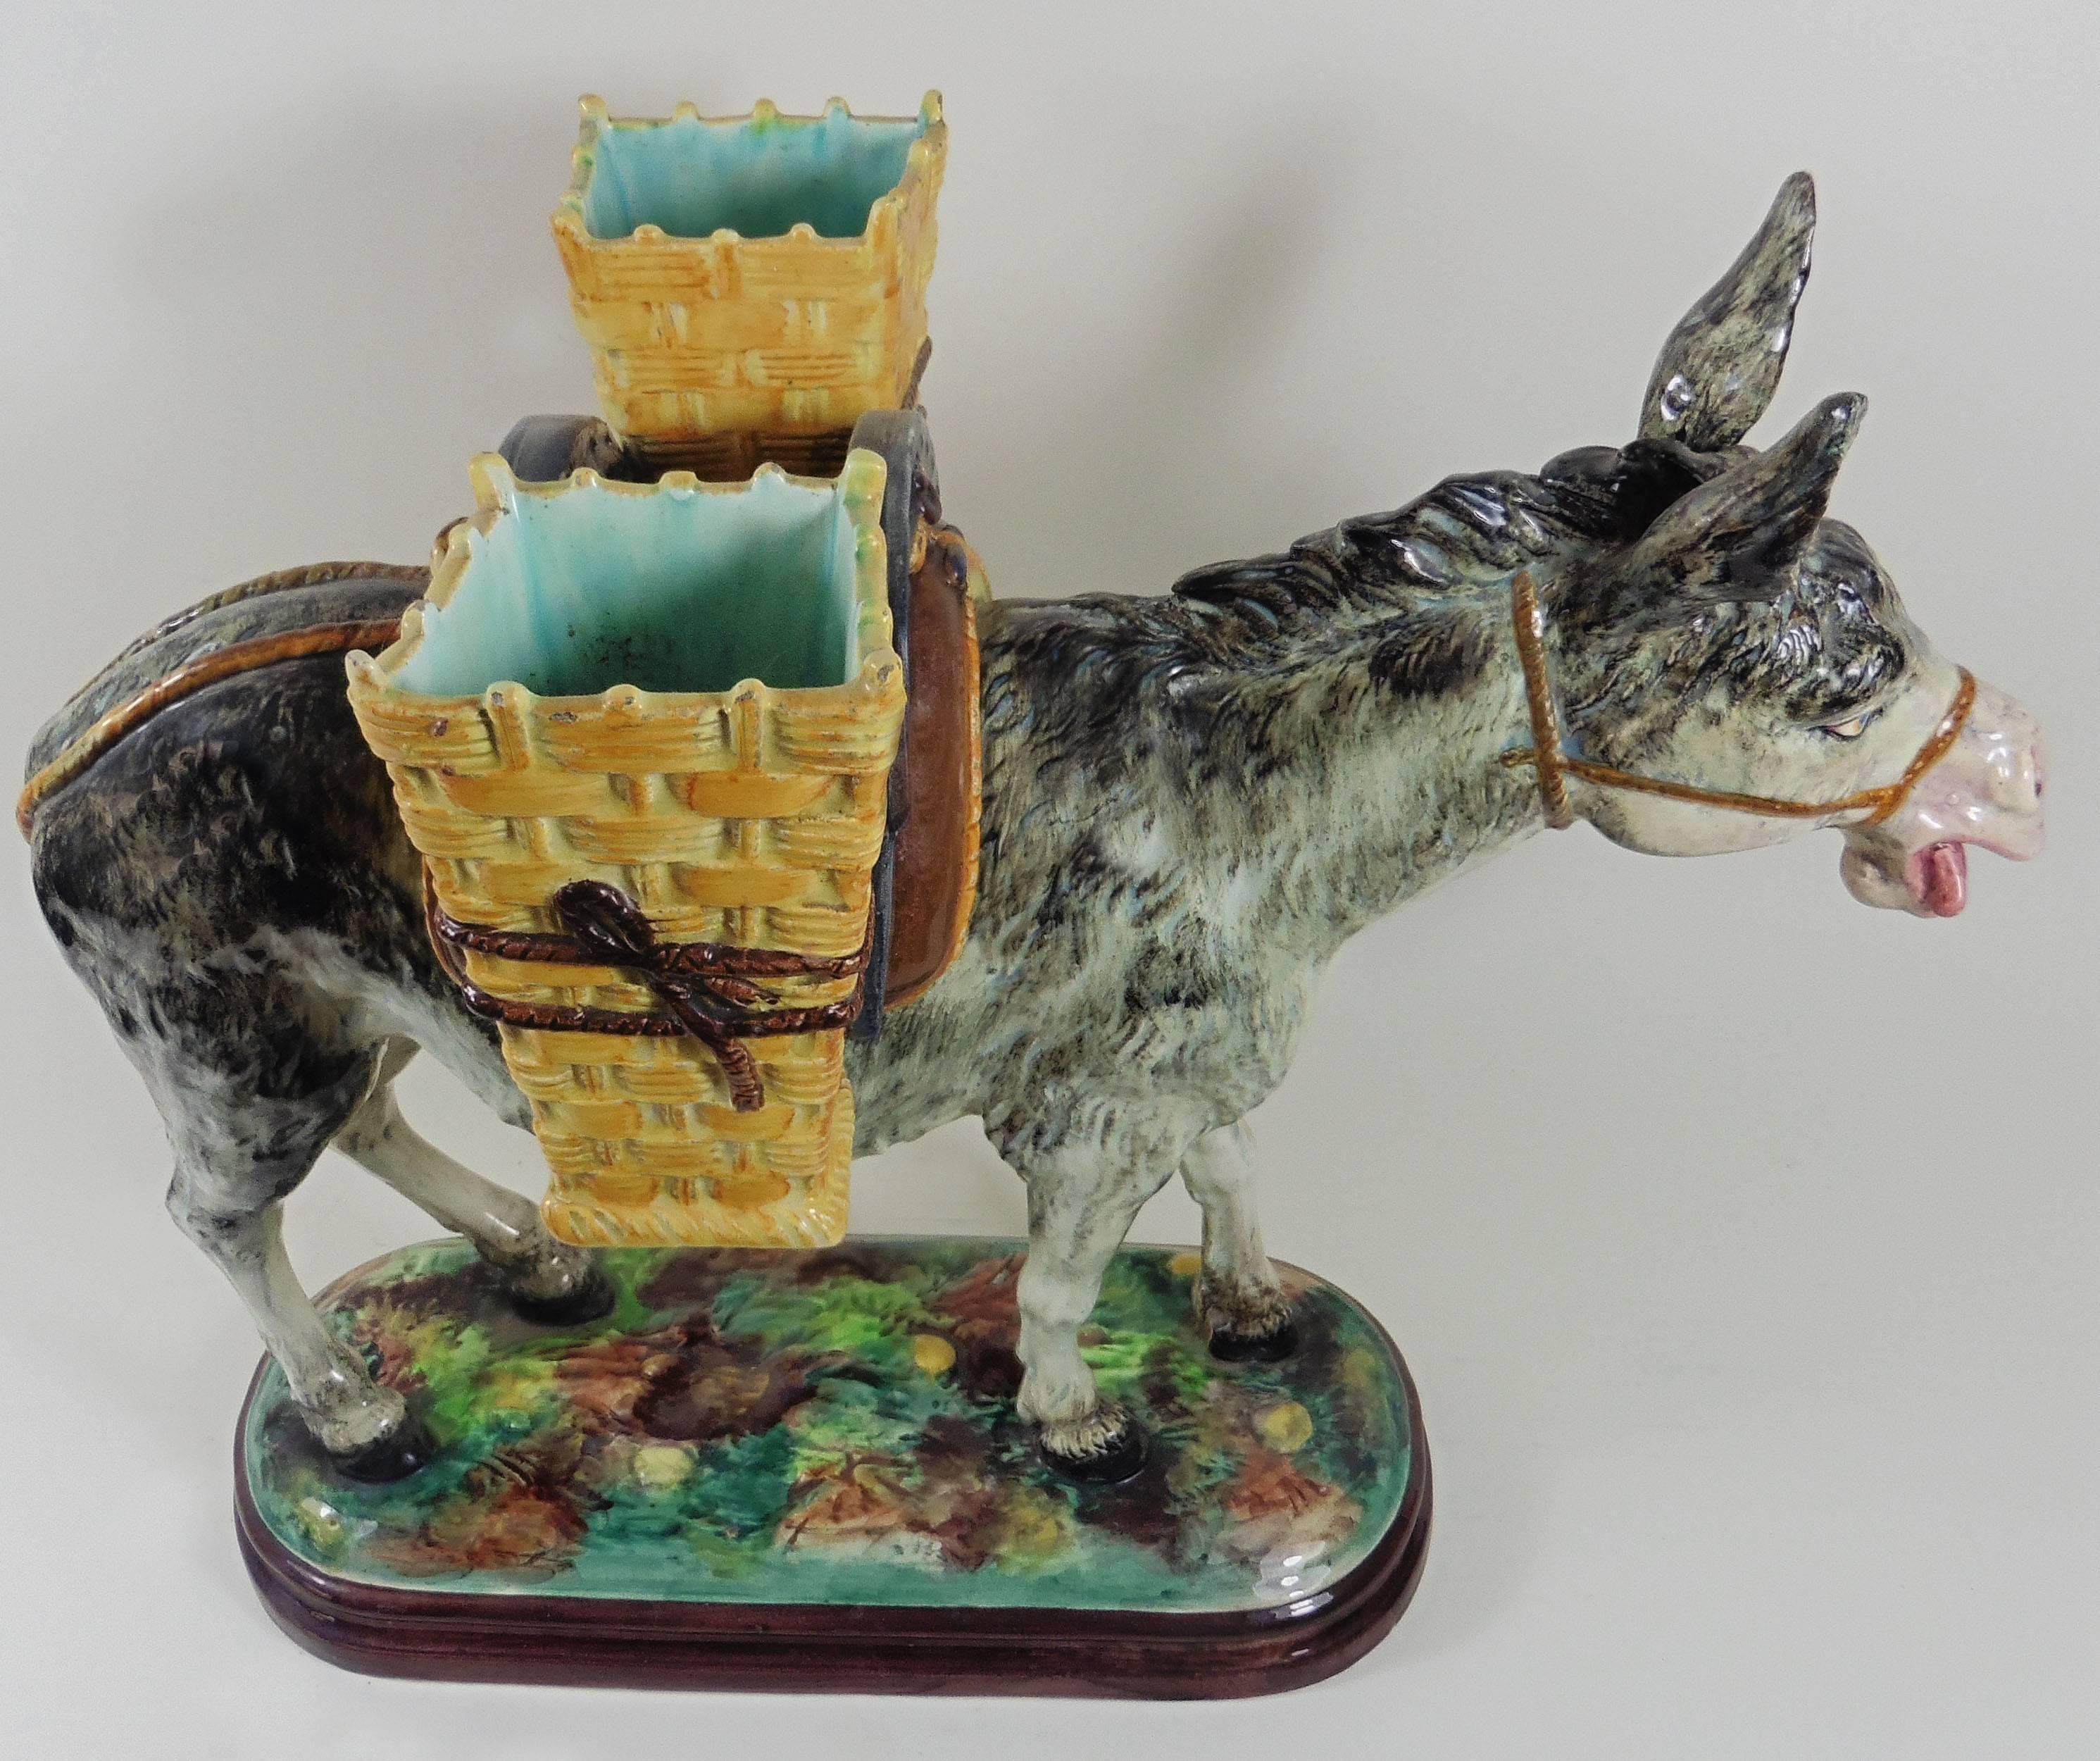 Fine large Majolica donkey with his two yellow baskets signed Jerome Massier Fils, circa 1900.
The Massier are known for the quality of their unique enamels and paintings. The Massier family excelled in the representation of all animals at the end